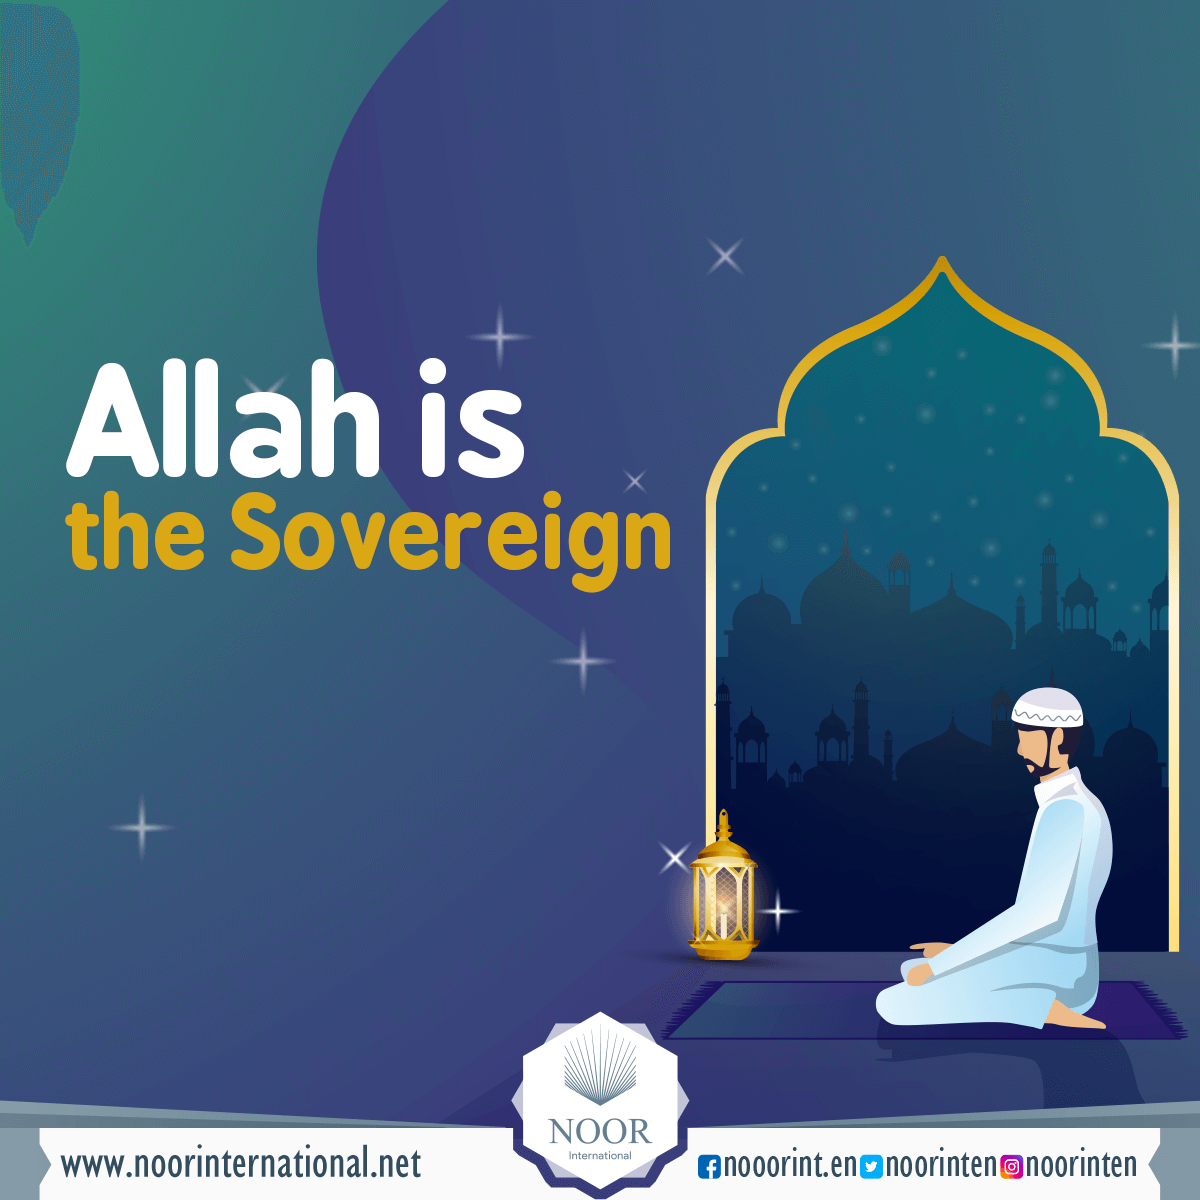 Allah is the Sovereign